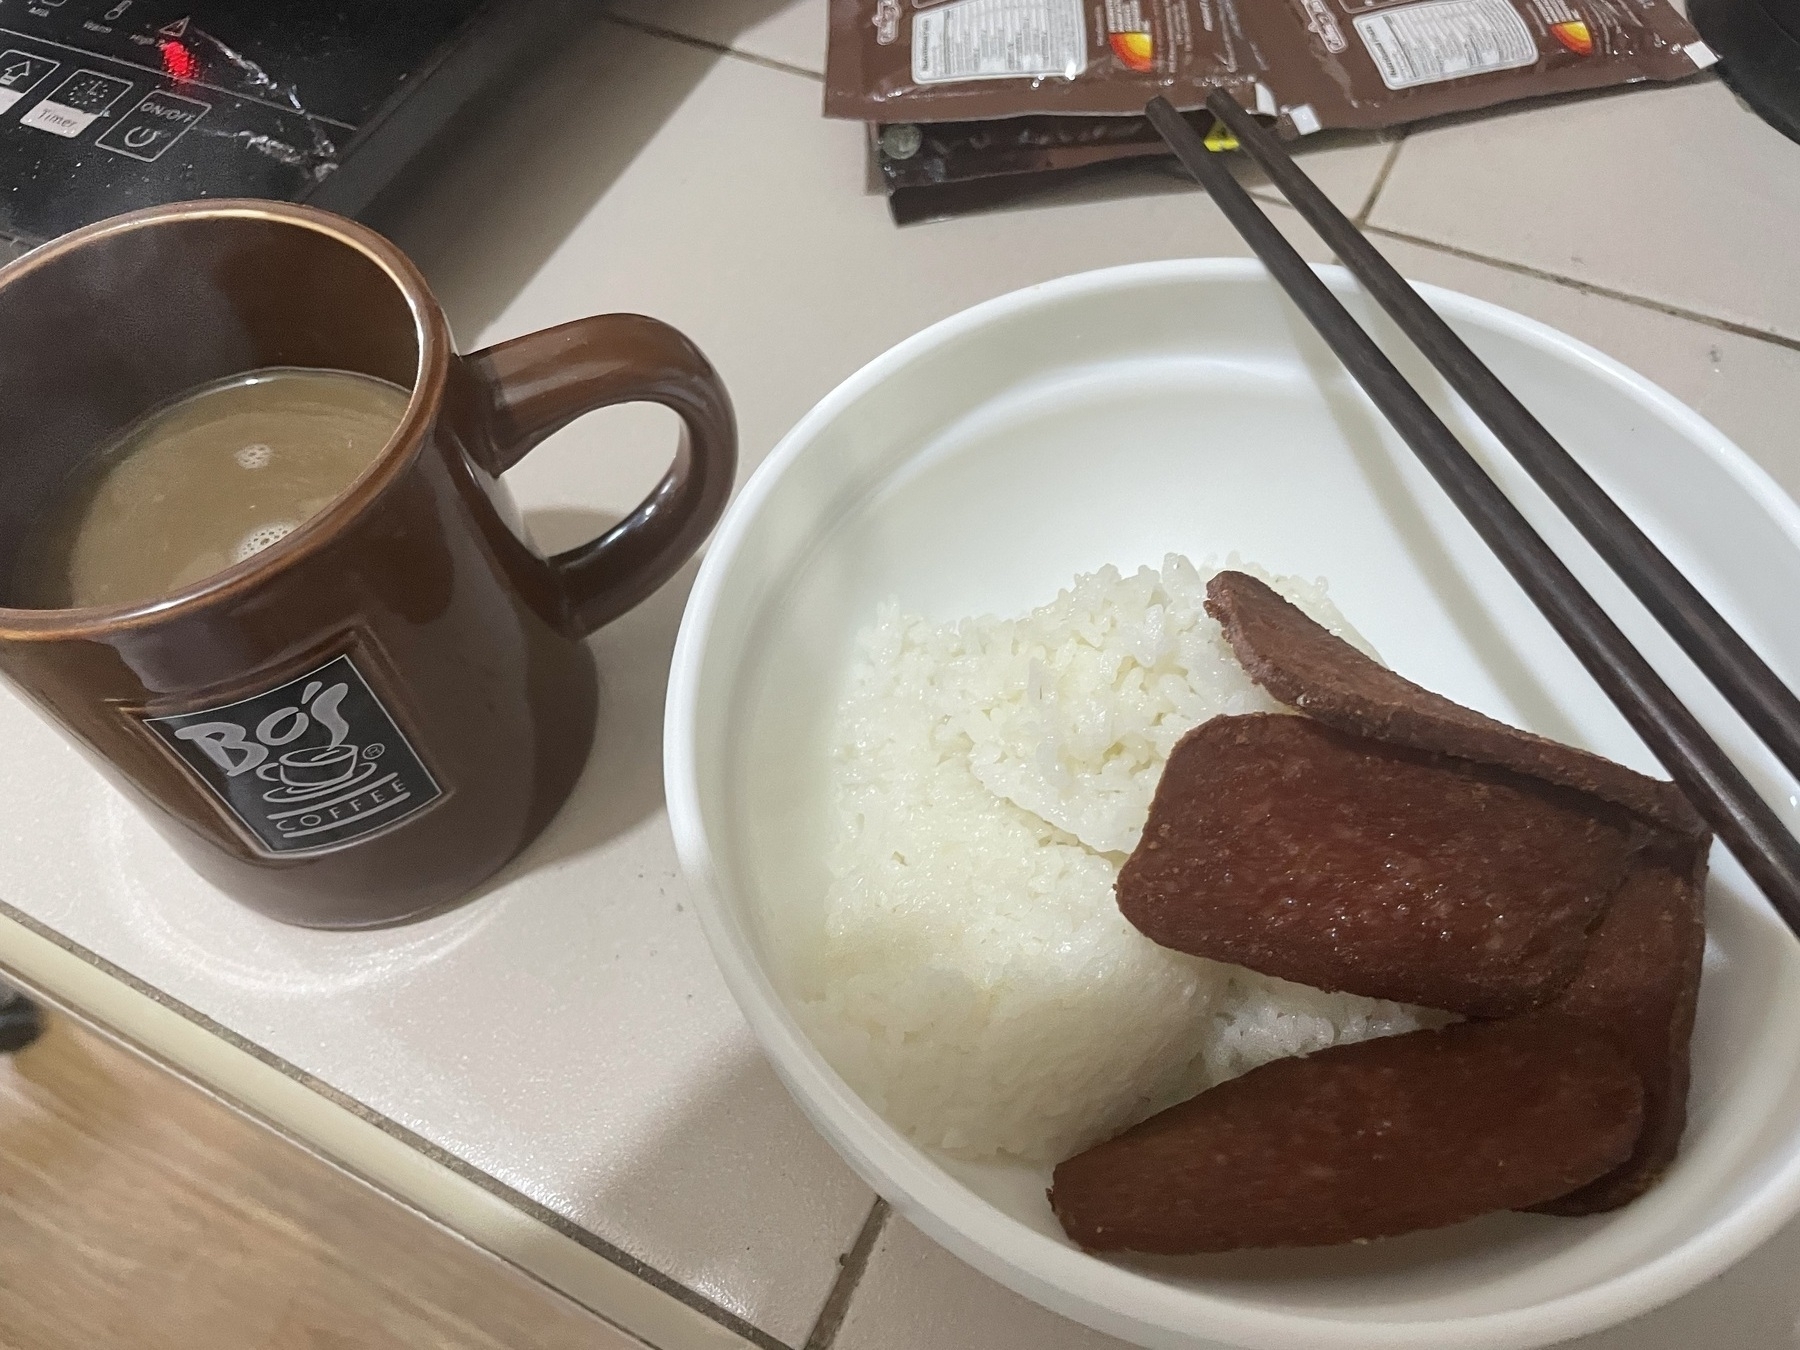 Chi's usual breakfast meal, which is a hot coffee with sugar and creamer and fried luncheon meat with a couple of scoops of rice. Her utensils are chopsticks, and her meal is placed in a bowl.